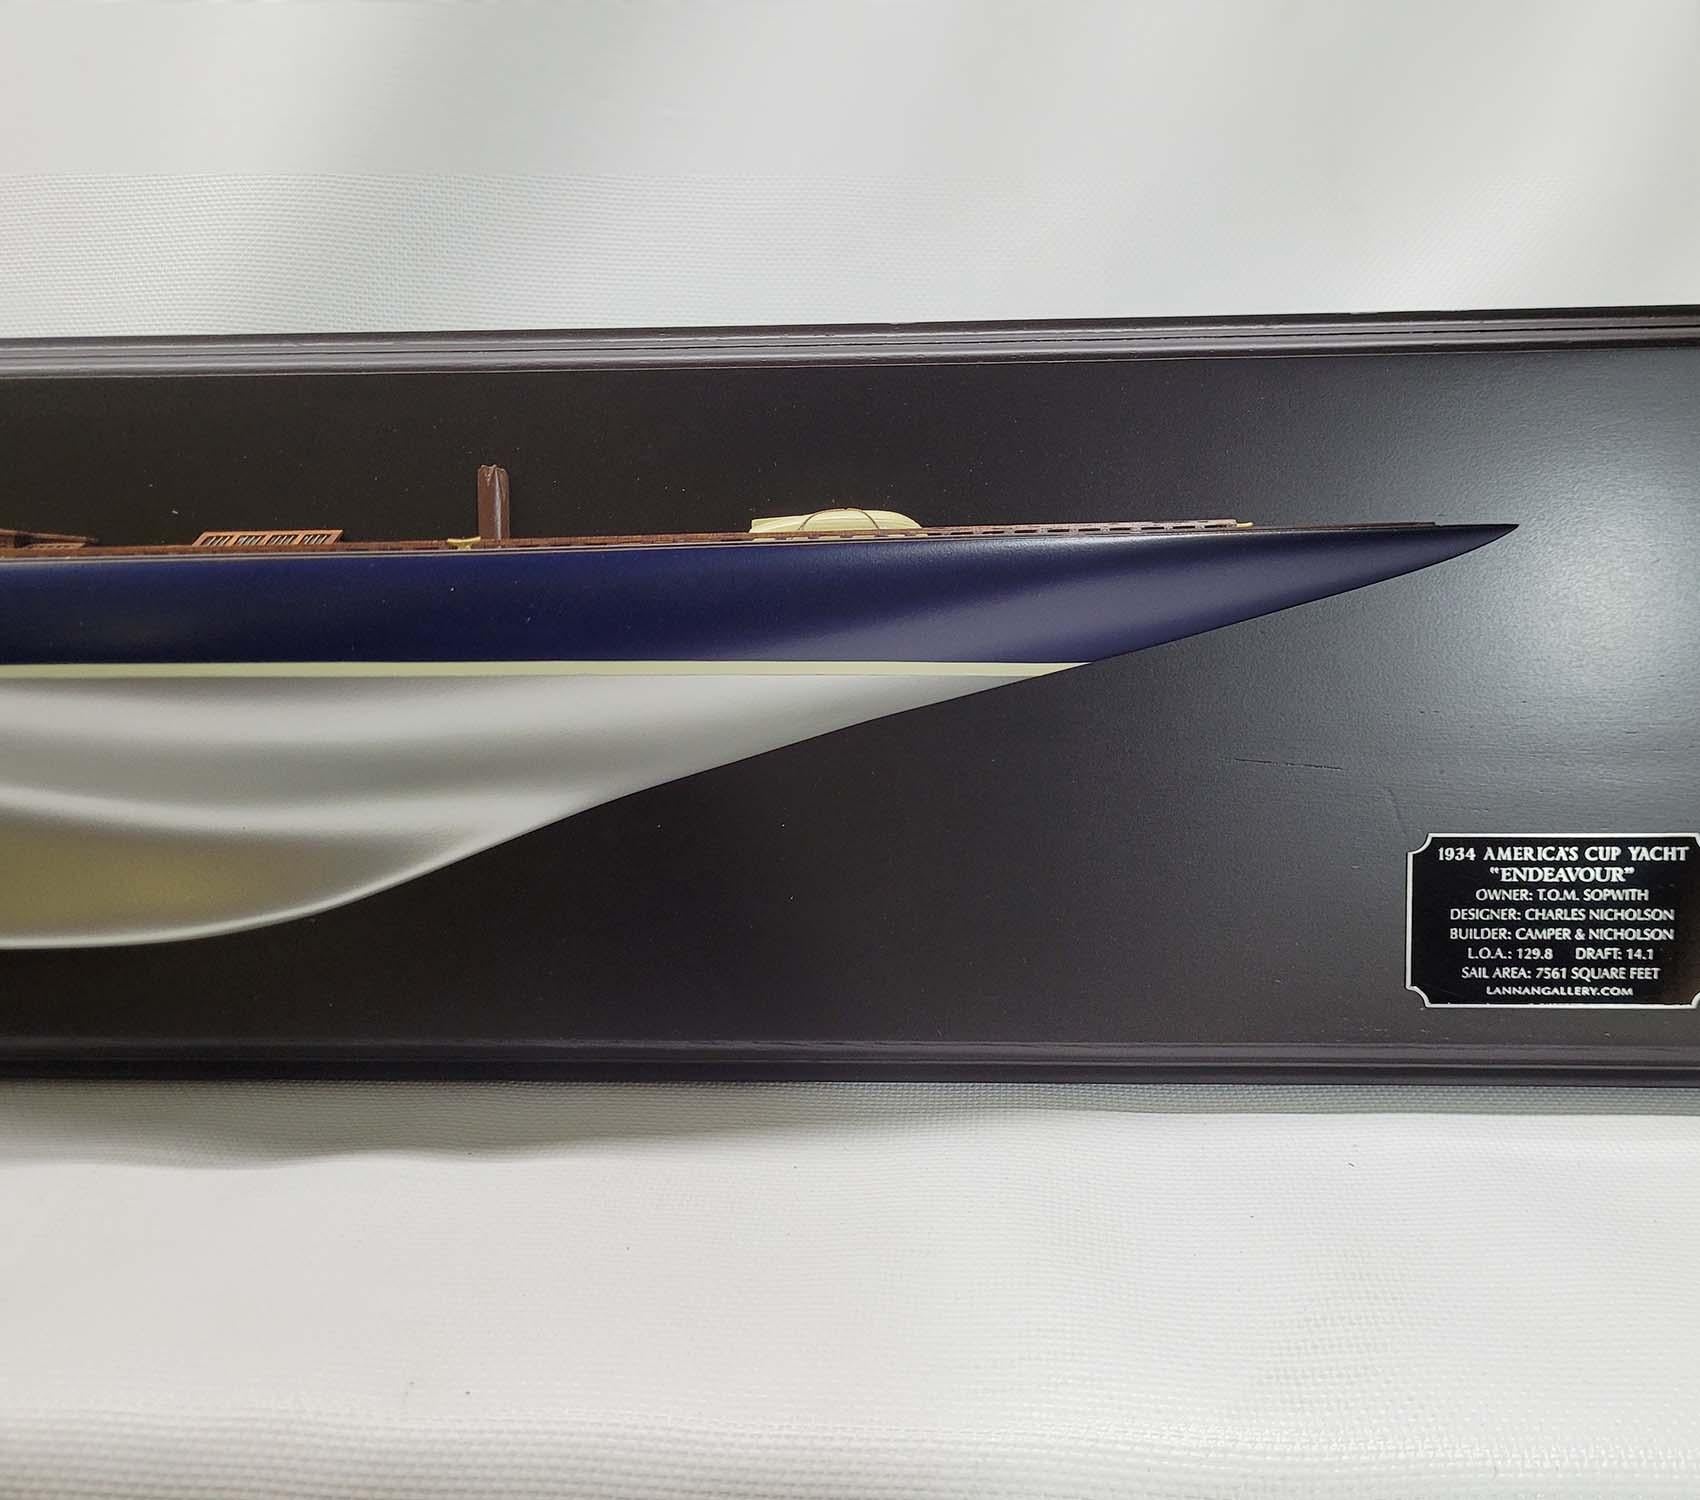 Half Model of the Yacht Endeavor - Silver 1